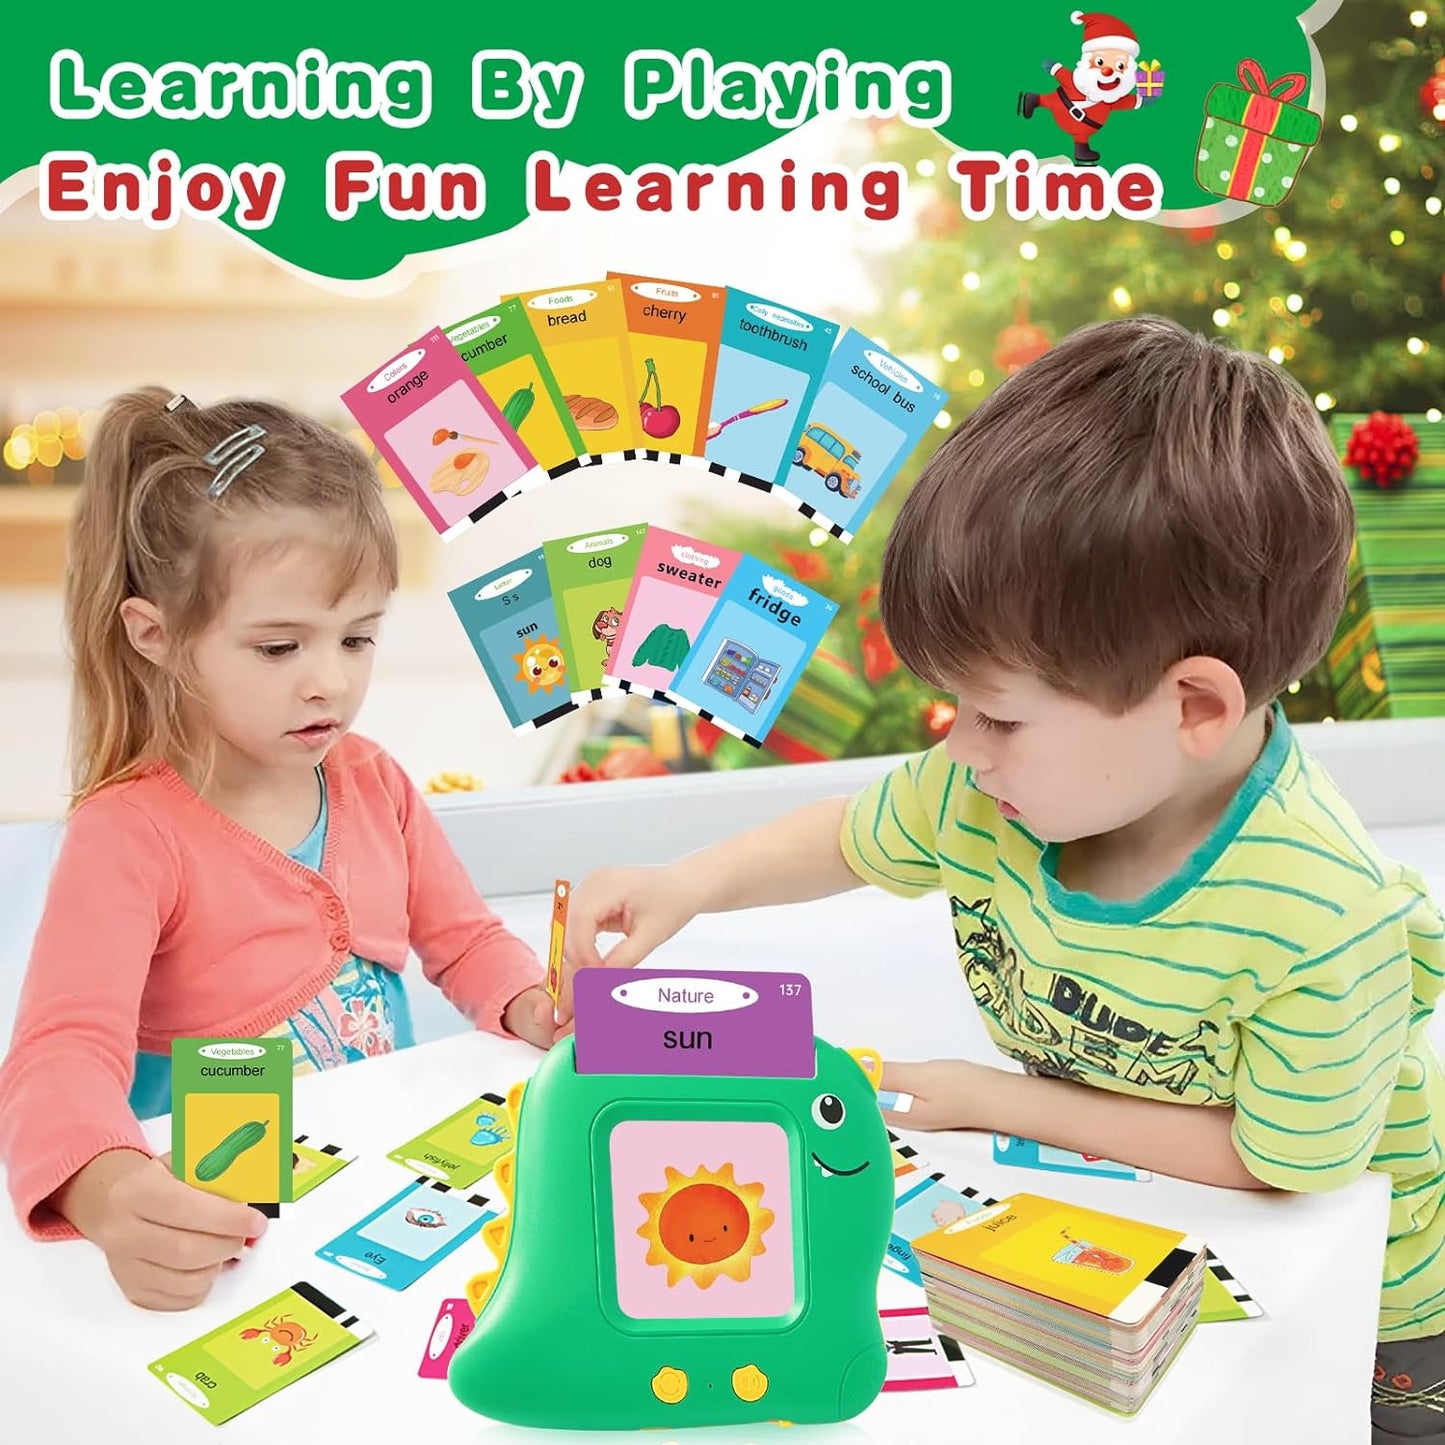 510 Words Pocket Speech Talking Flash Cards - Montessori Speech Buddy Early Learning Speech Buddy Flashcards for Toddlers, Audible Educational Device Speech Therapy Materials Development Sensory Toys